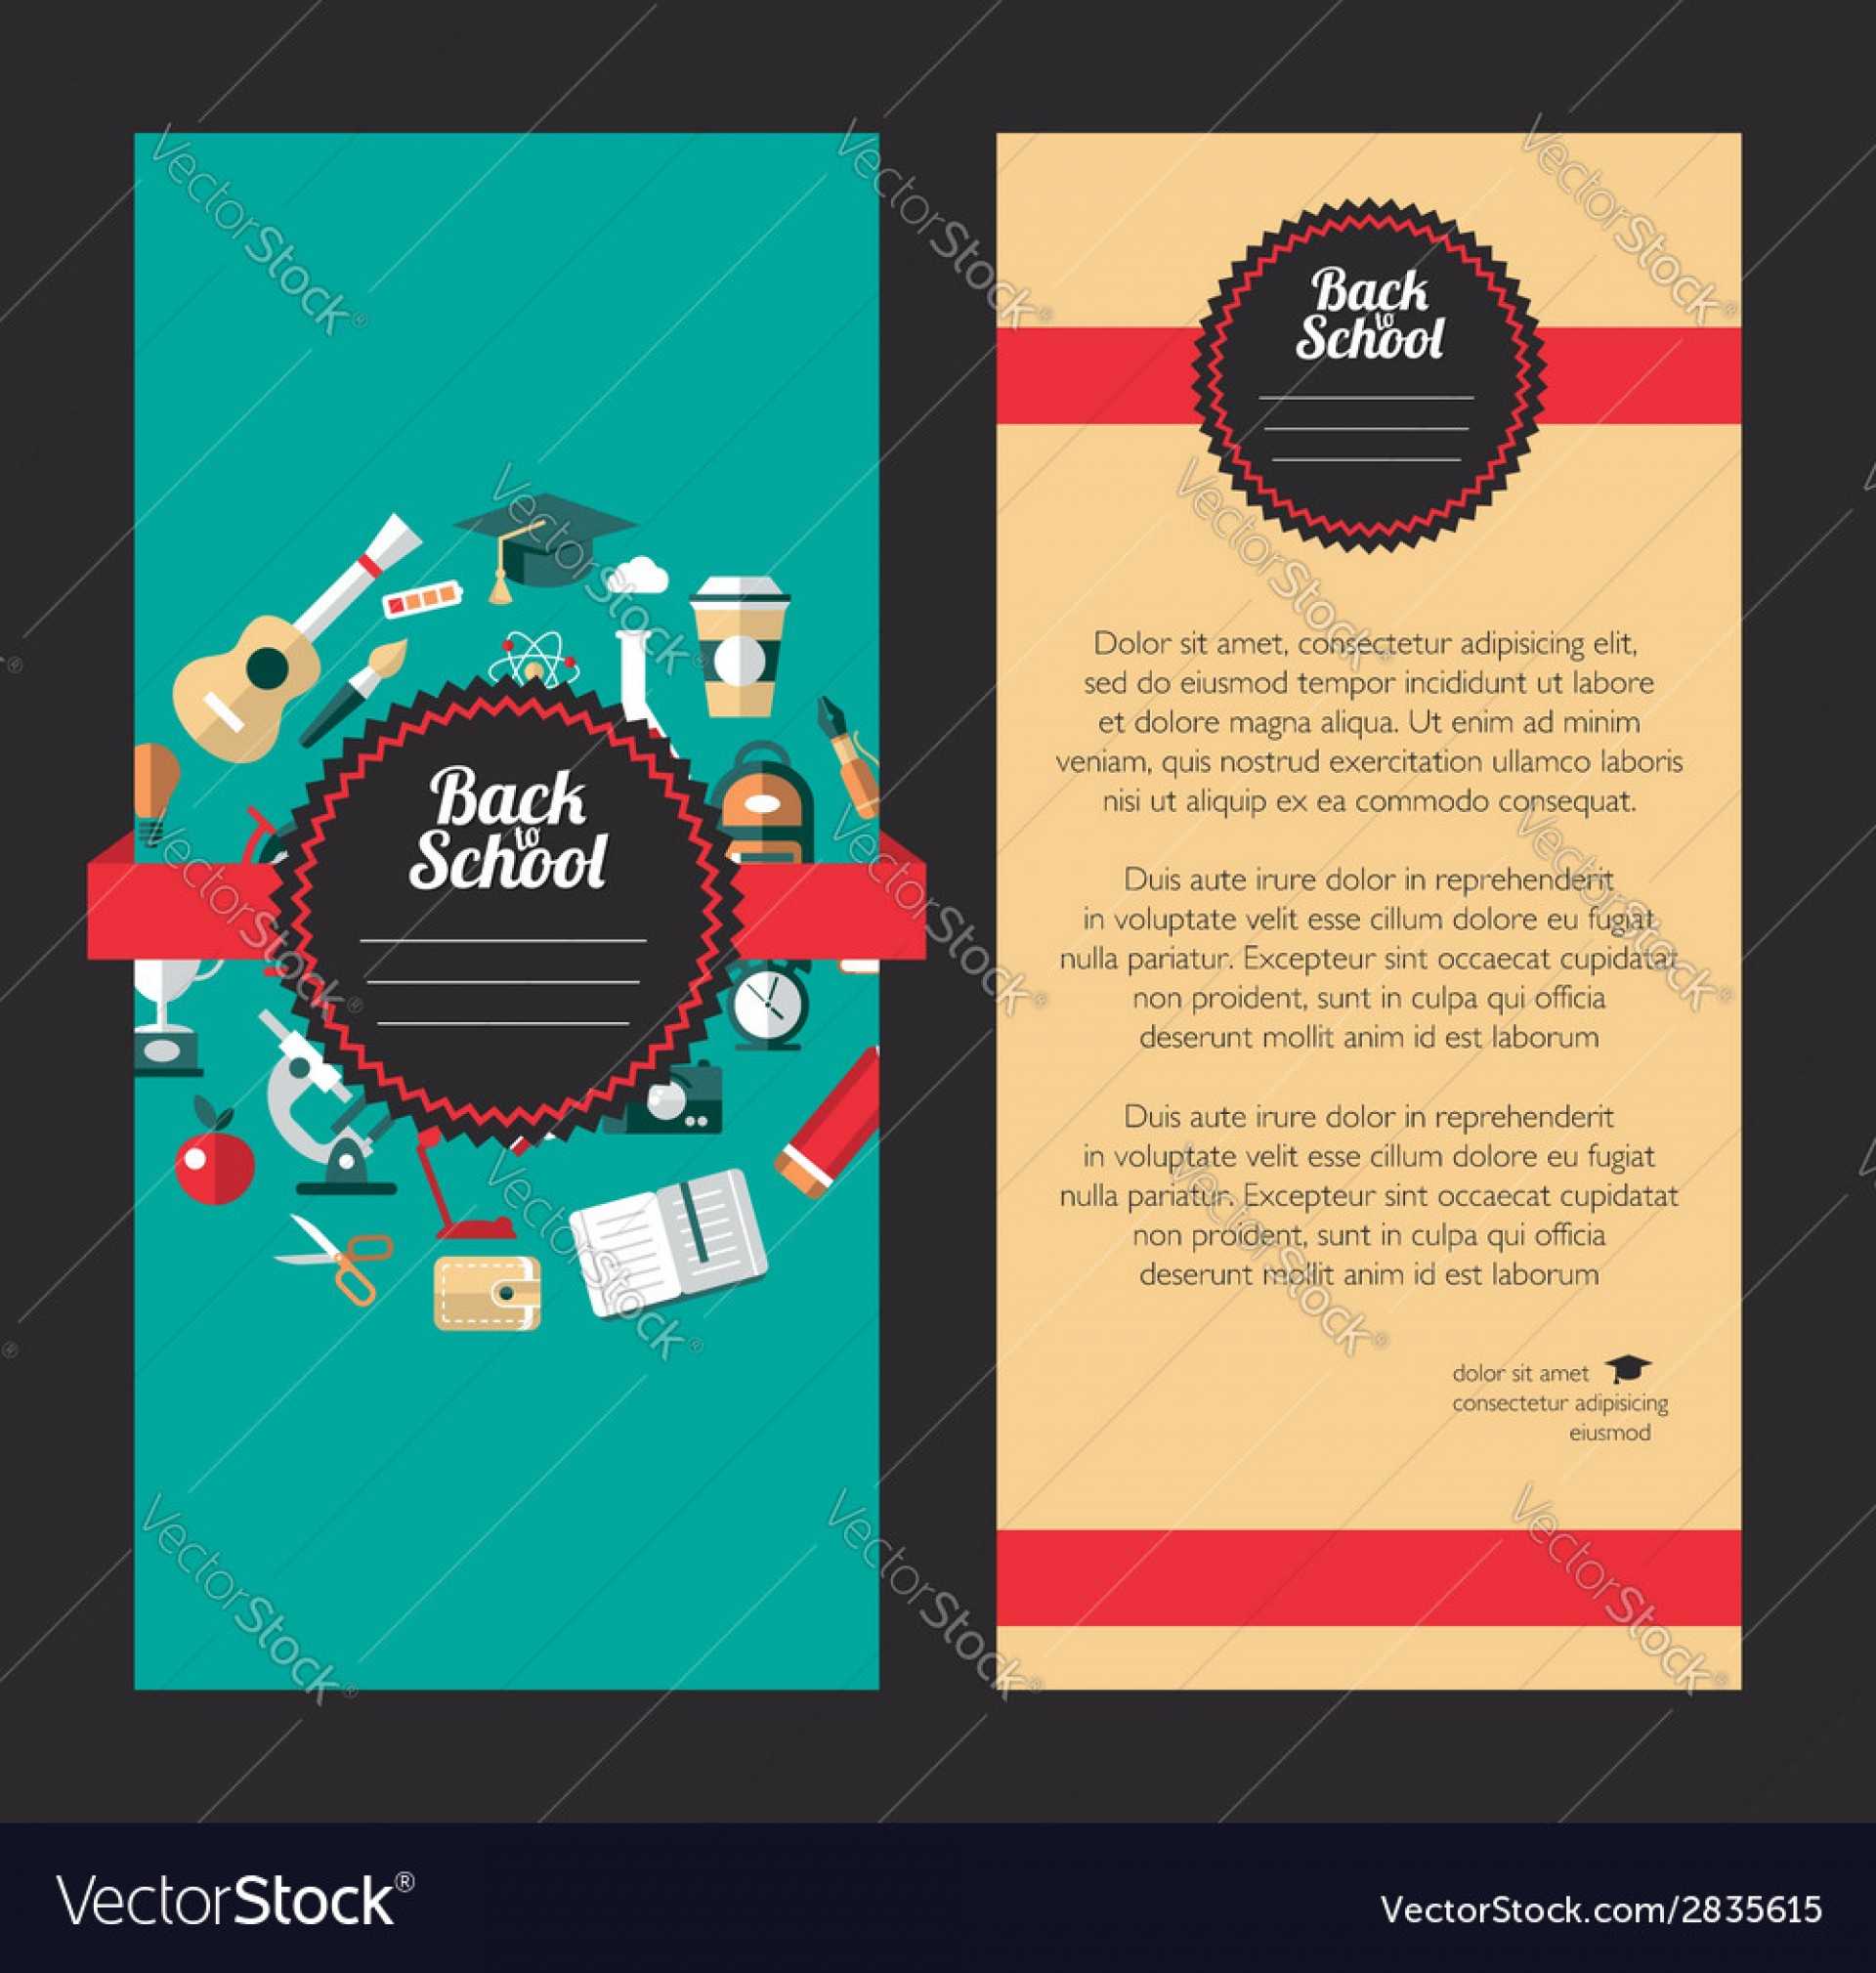 005 Free Graphic Design Templates For Flyers Creative In Designs For Flyers Template